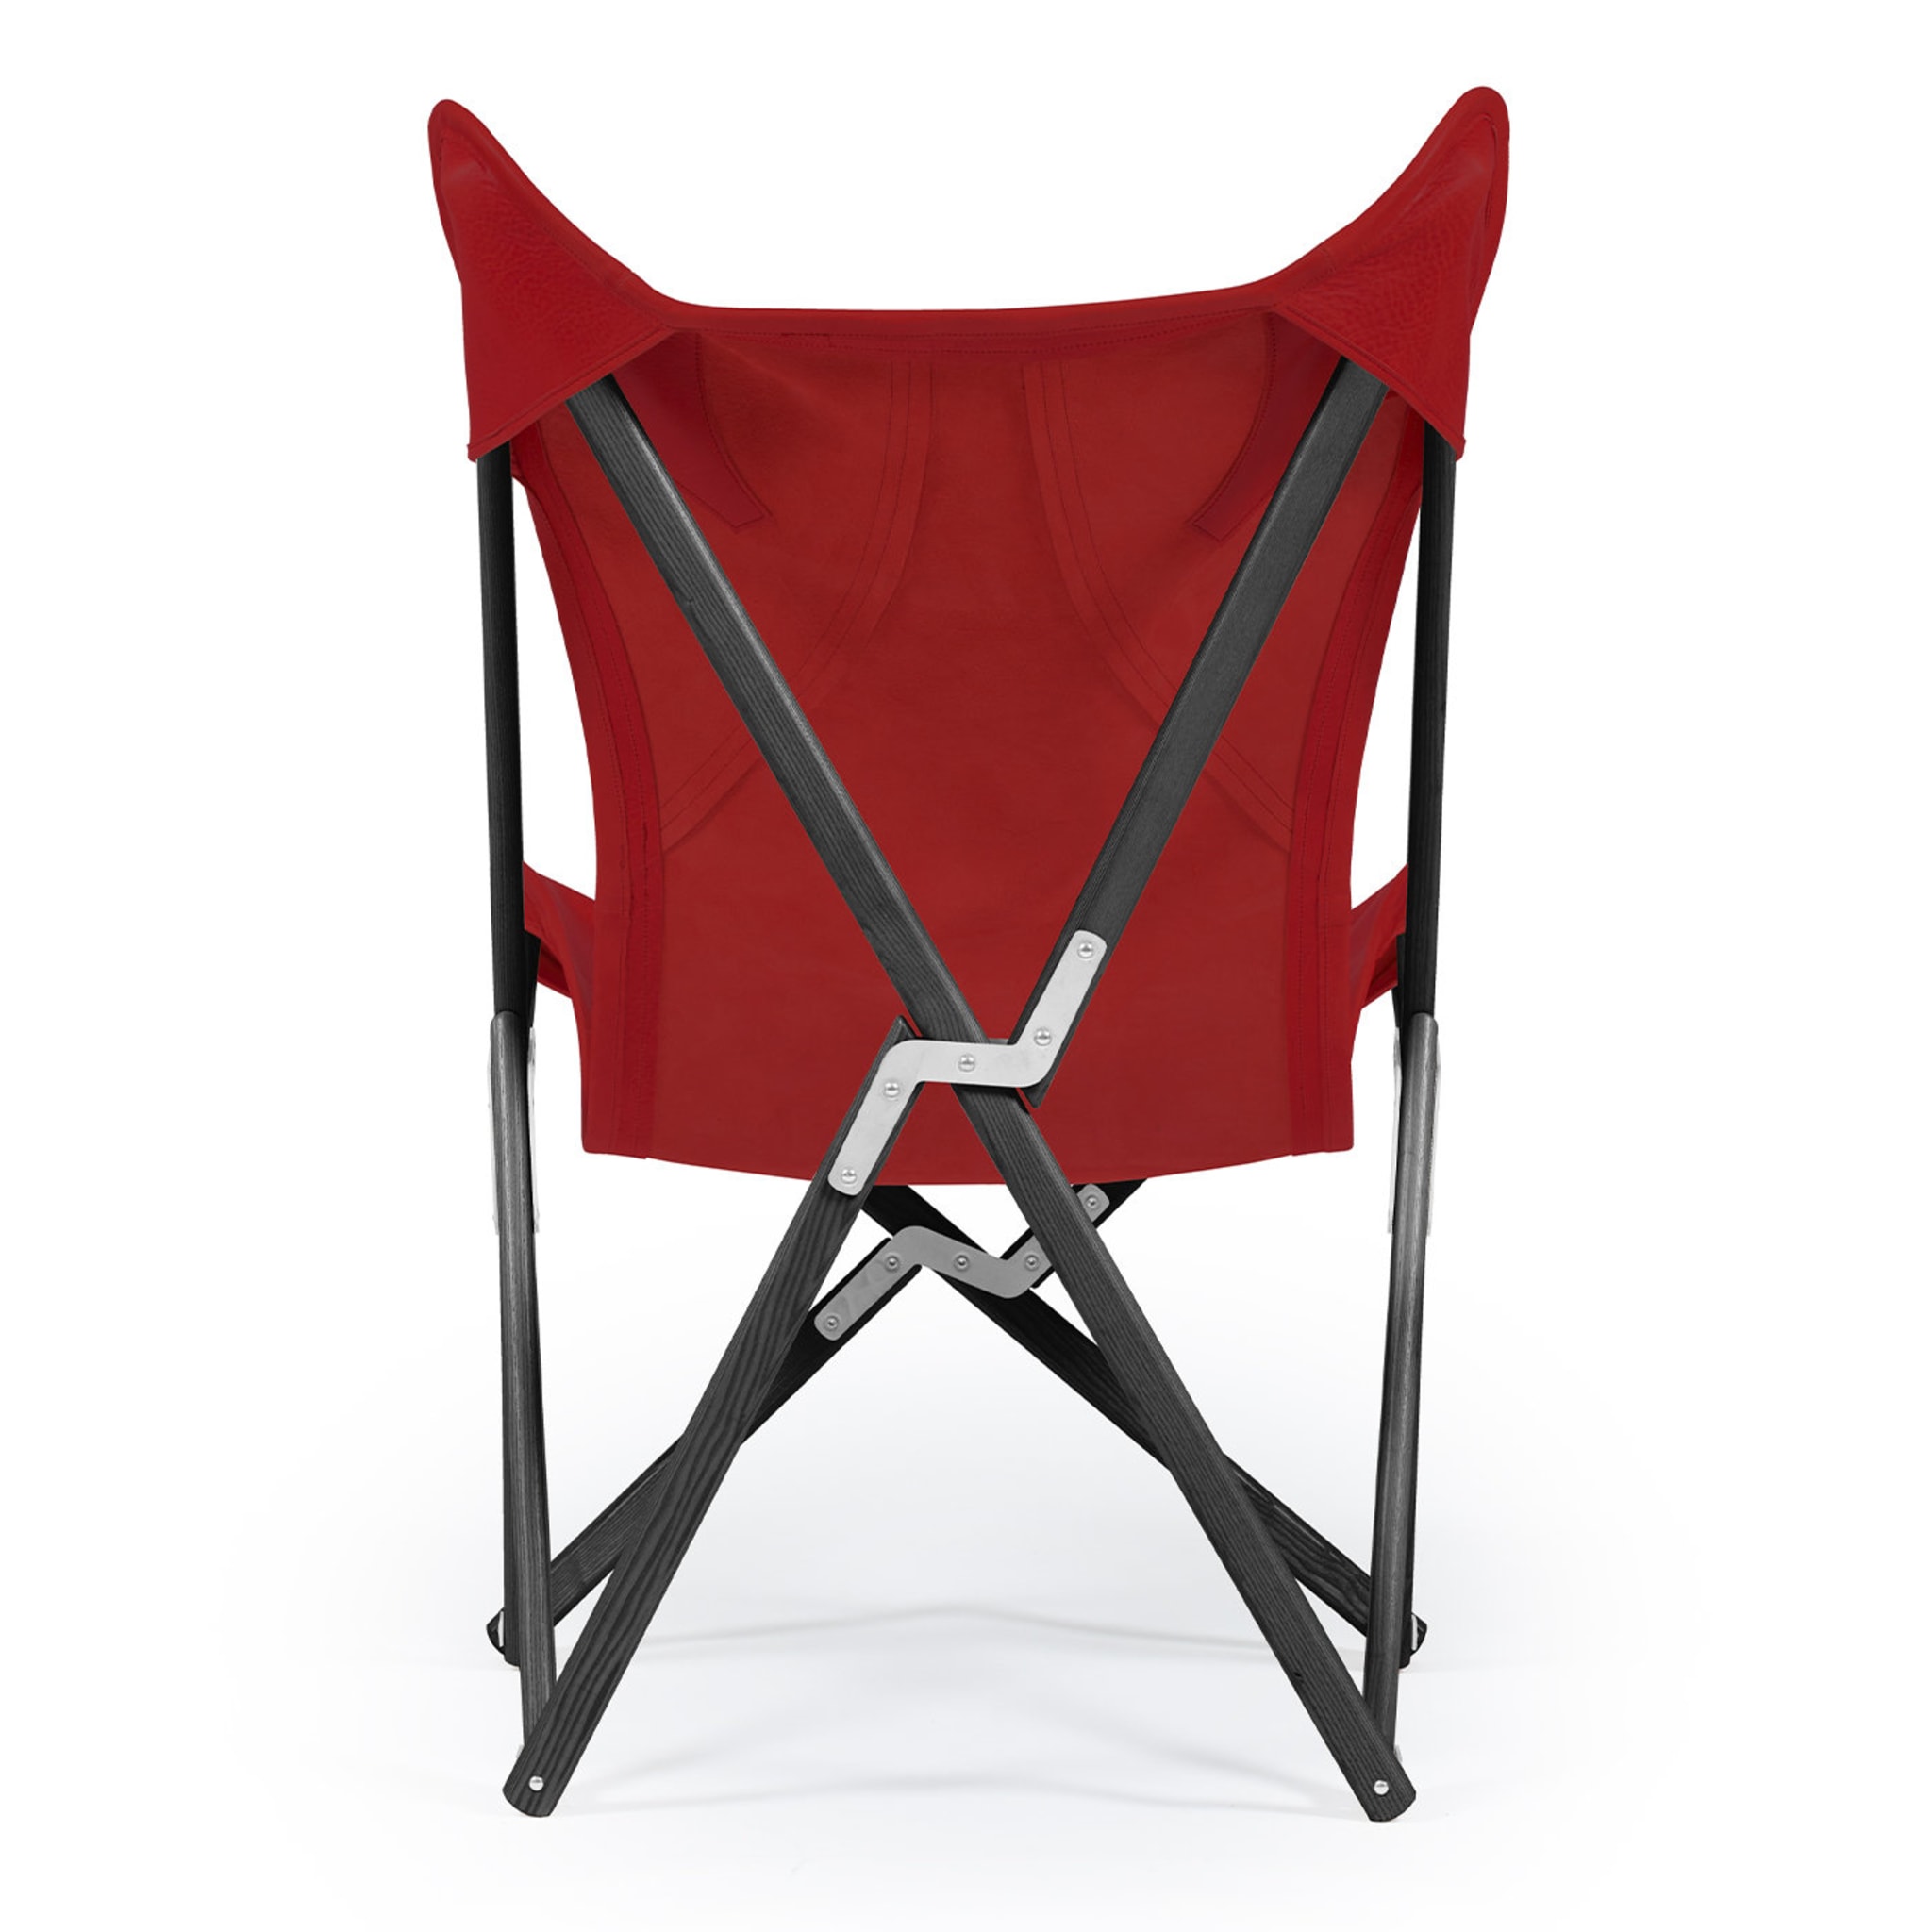 Tripolina Armchair in Red Leather - Alternative view 2